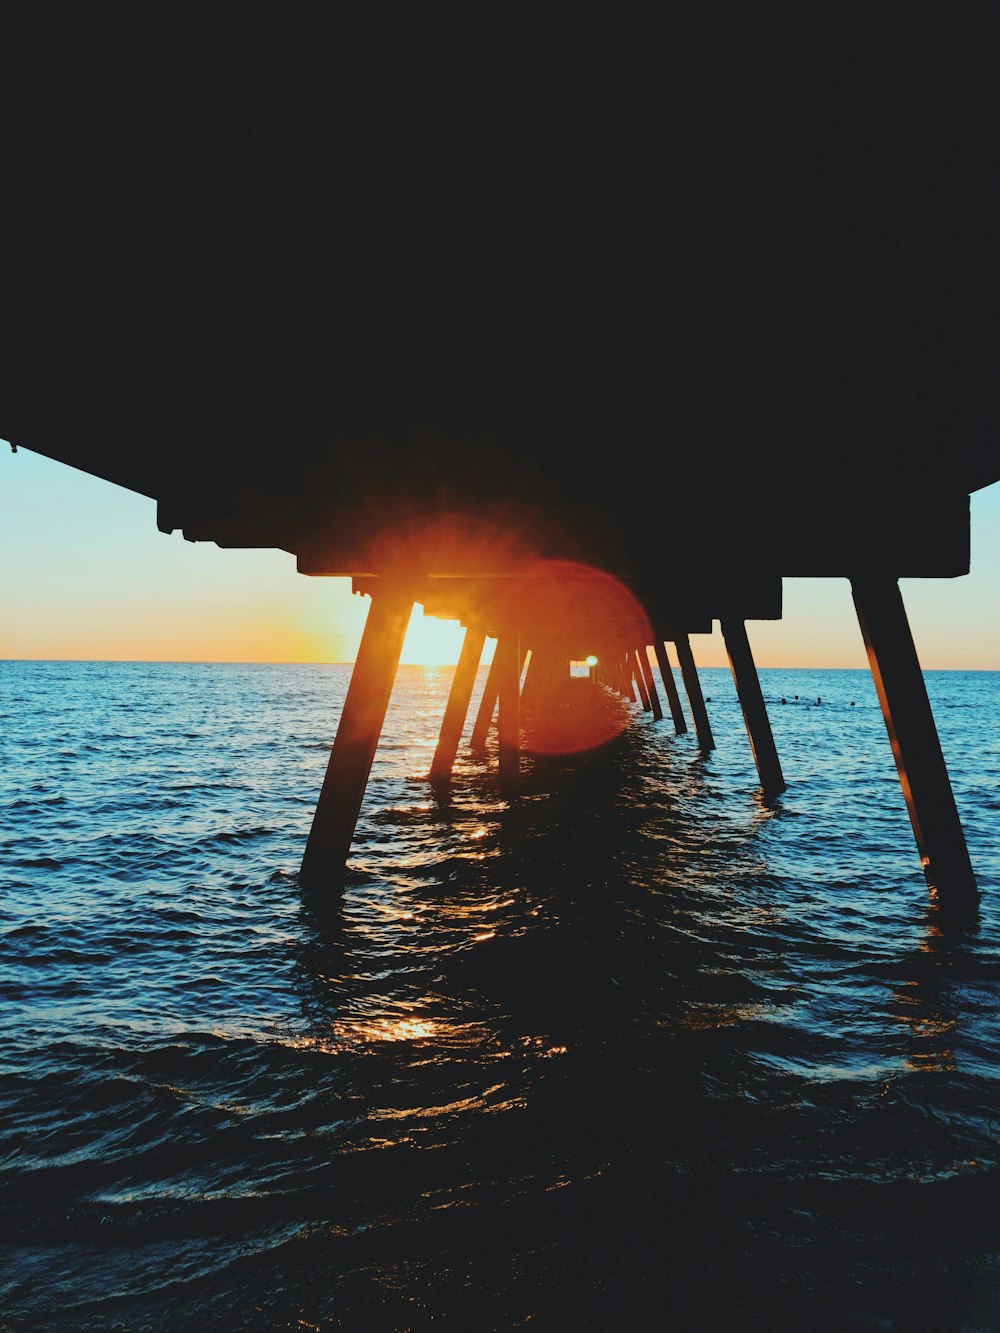 the sun is setting at the end of a pier